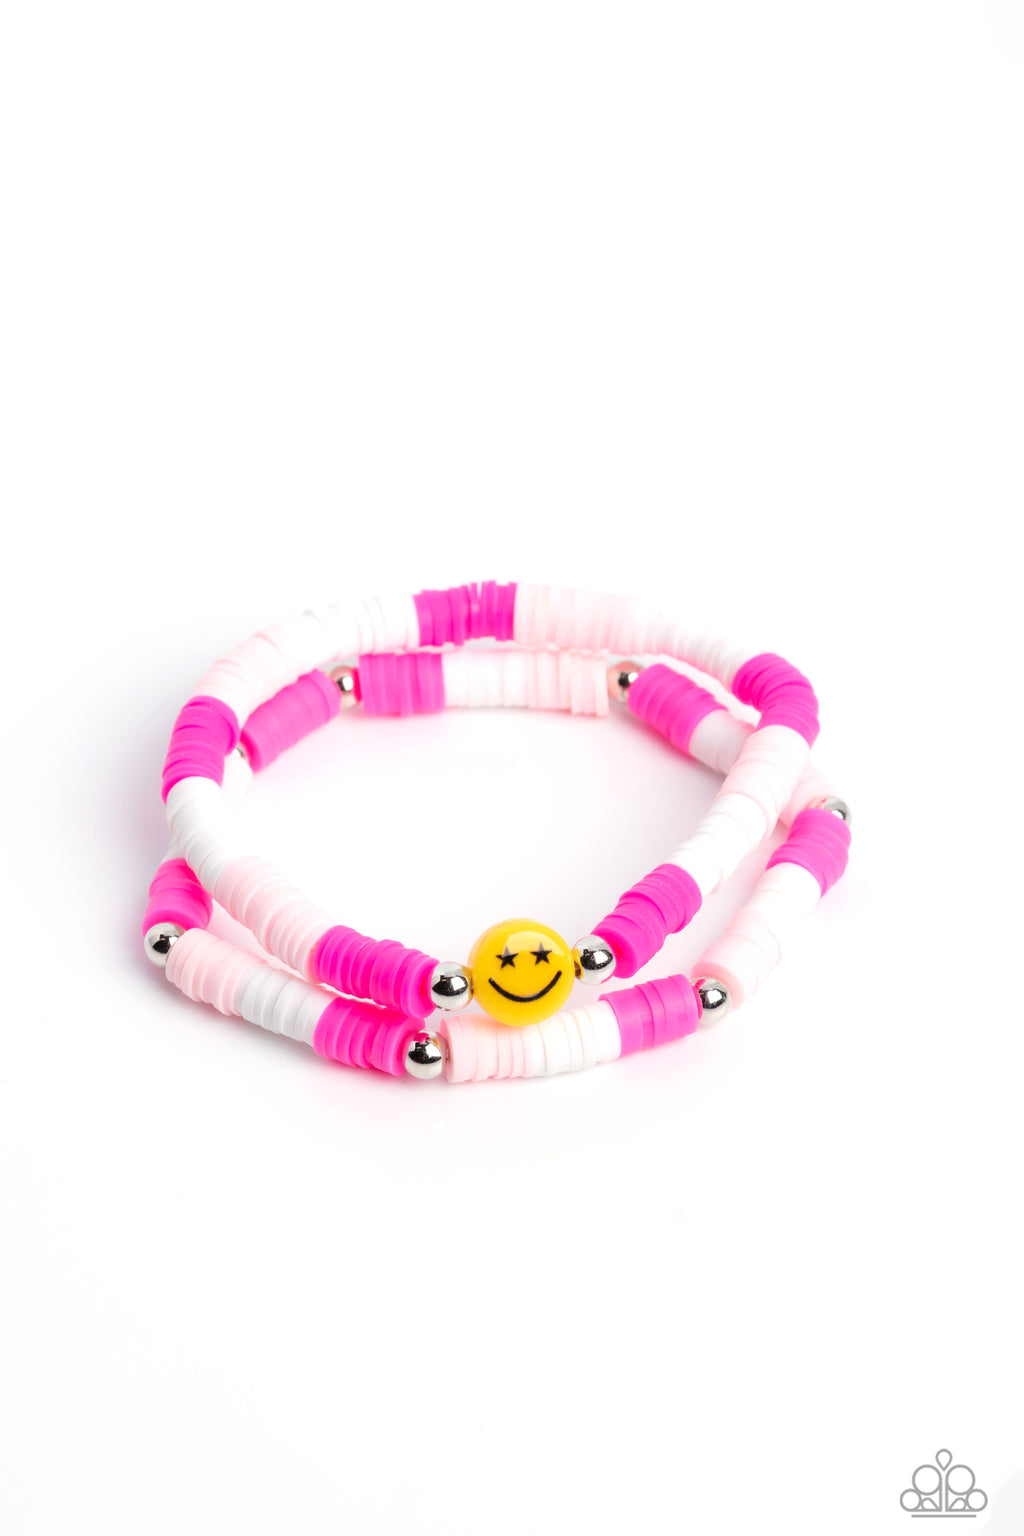 five-dollar-jewelry-in-smile-pink-bracelet-paparazzi-accessories